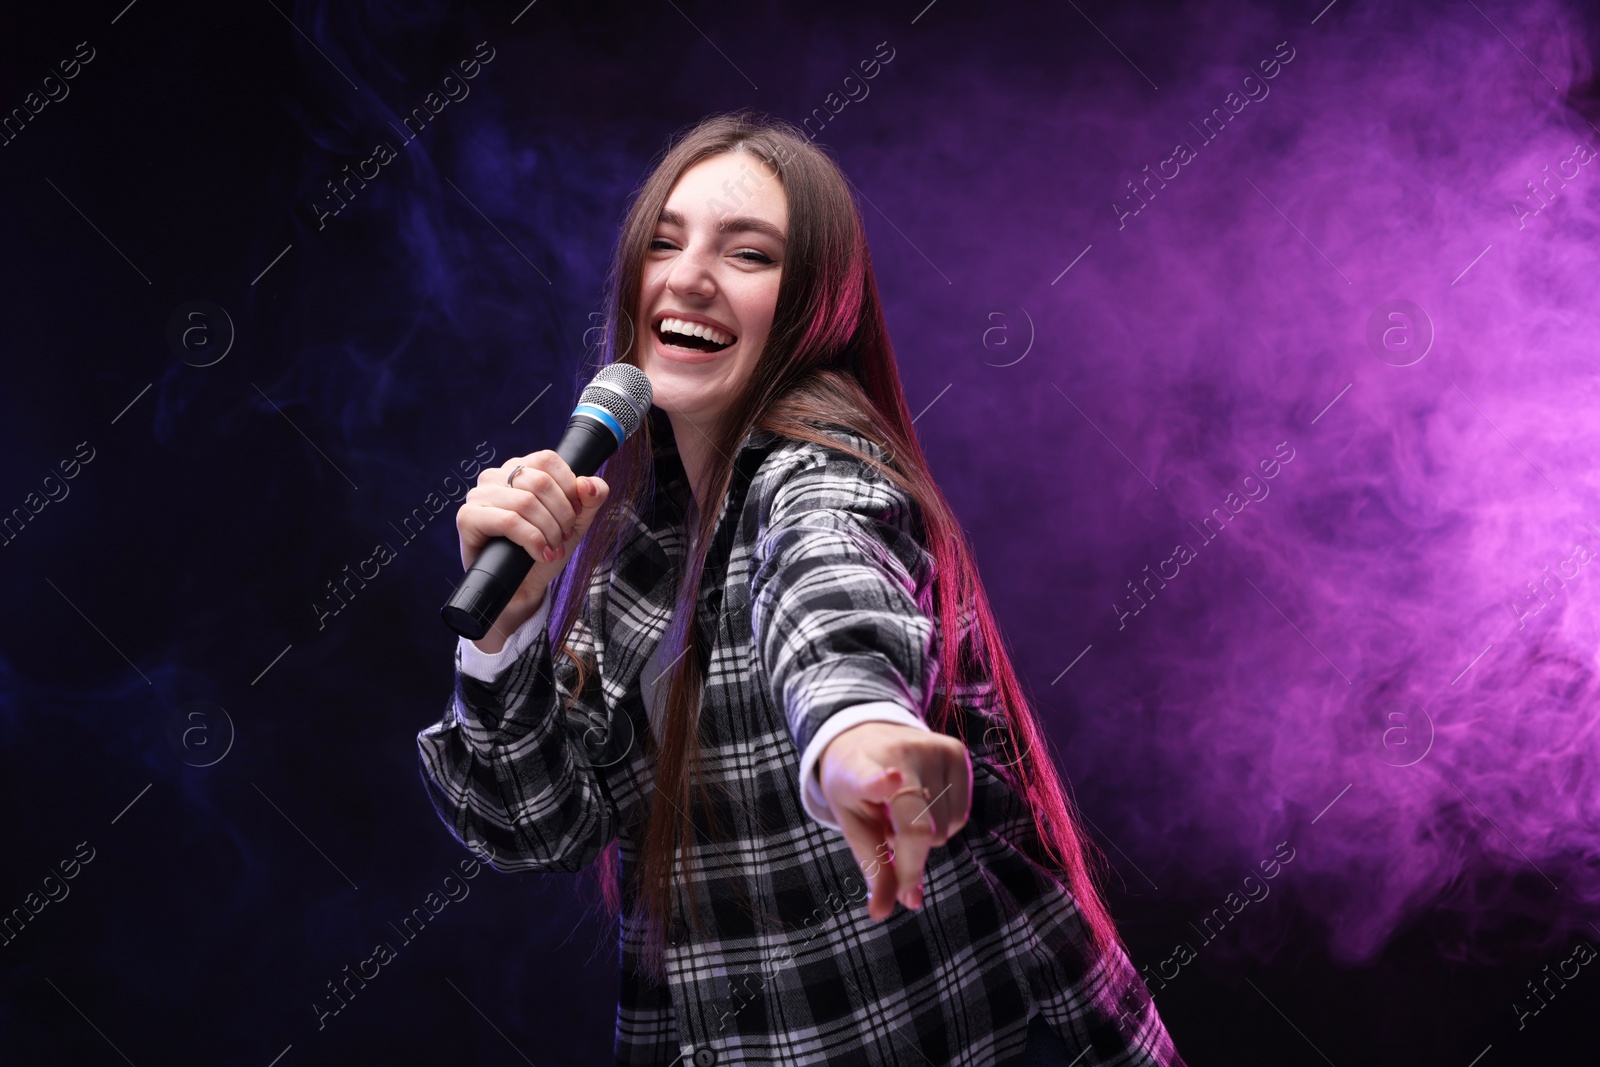 Photo of Emotional woman with microphone singing in color lights